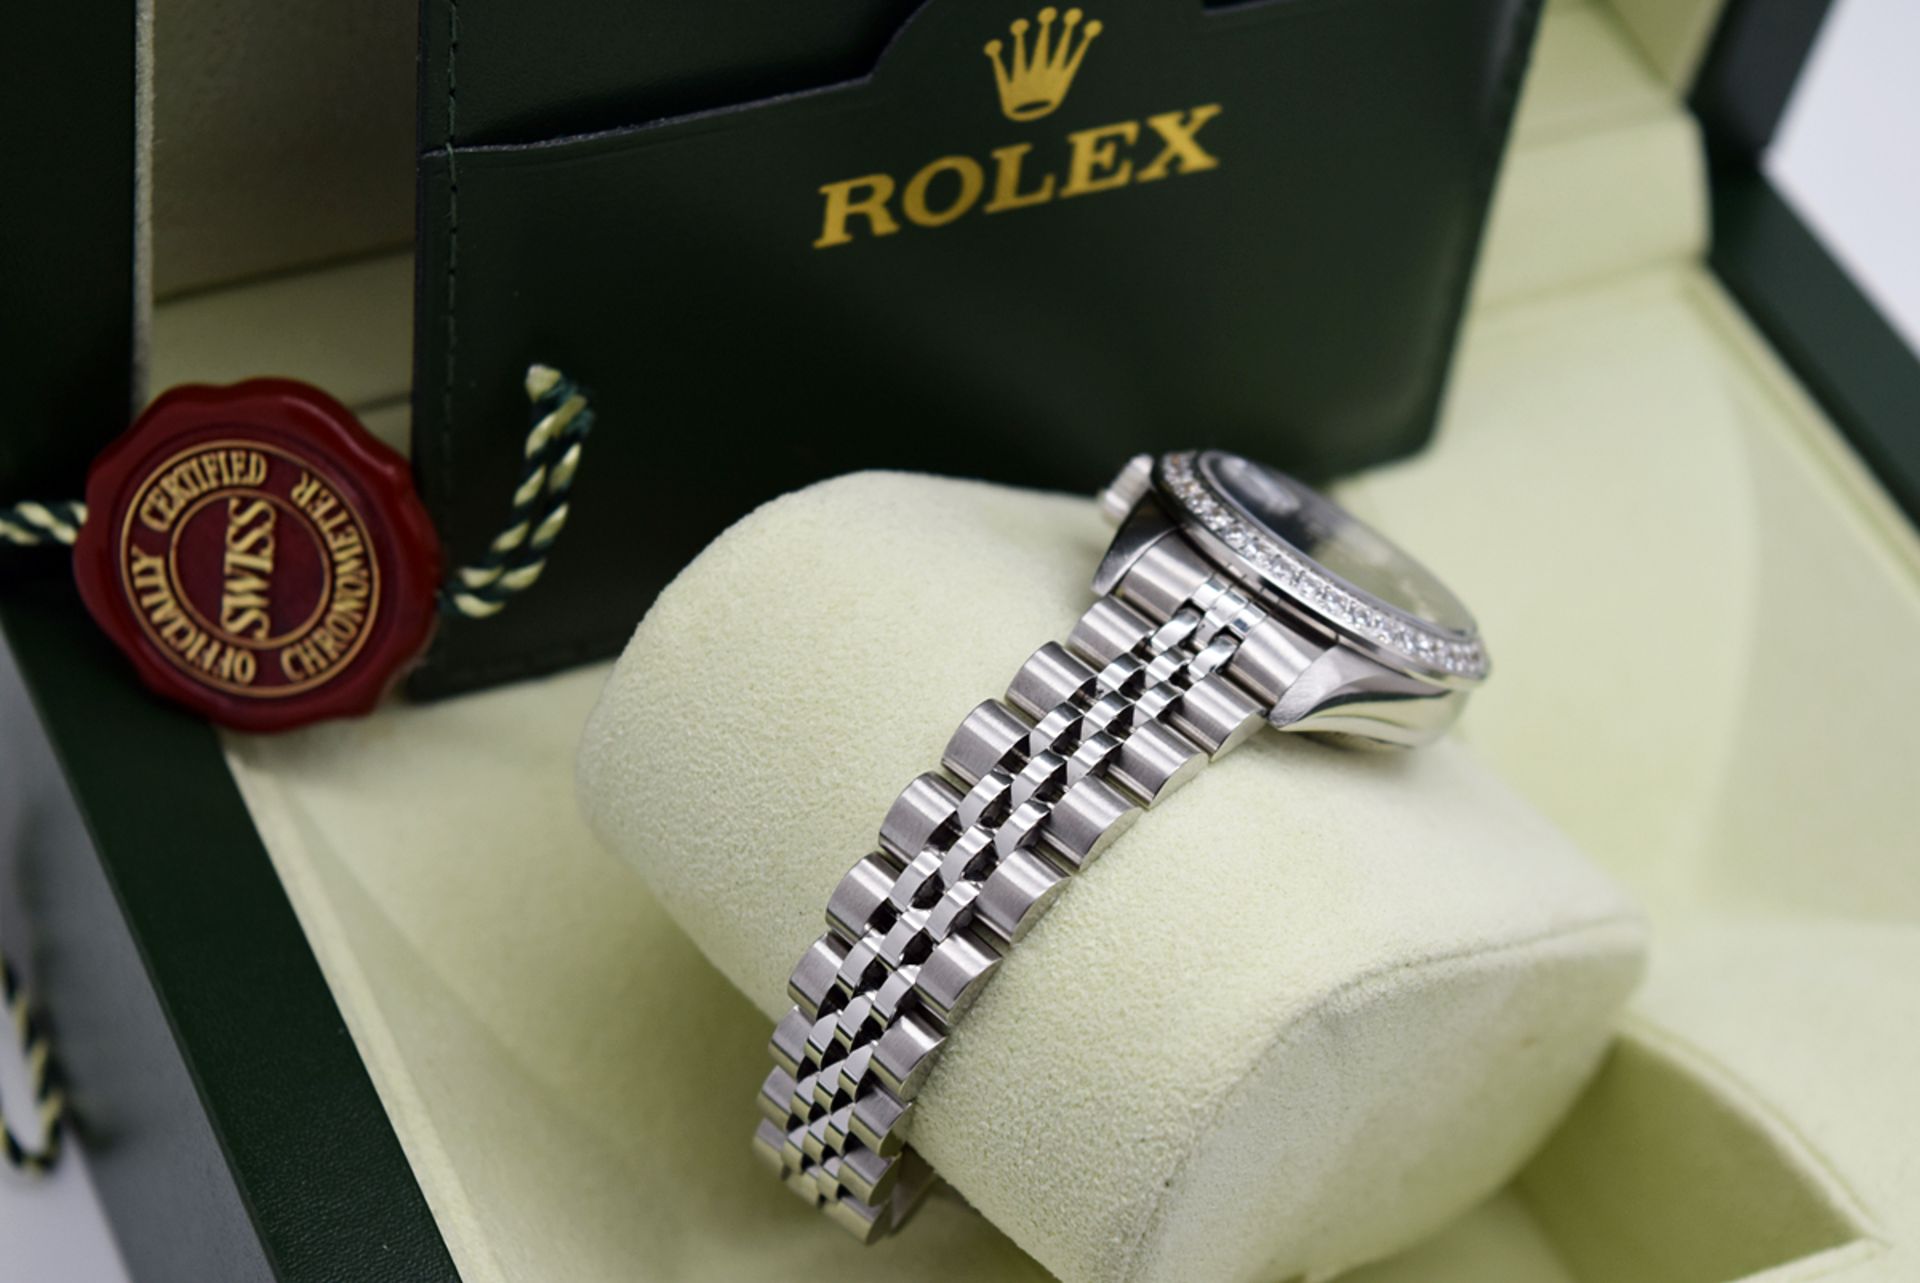 Rolex Datejust - Full Boxset and Certificate - Stainless Steel with Navy Blue Diamond Dial - Image 6 of 10